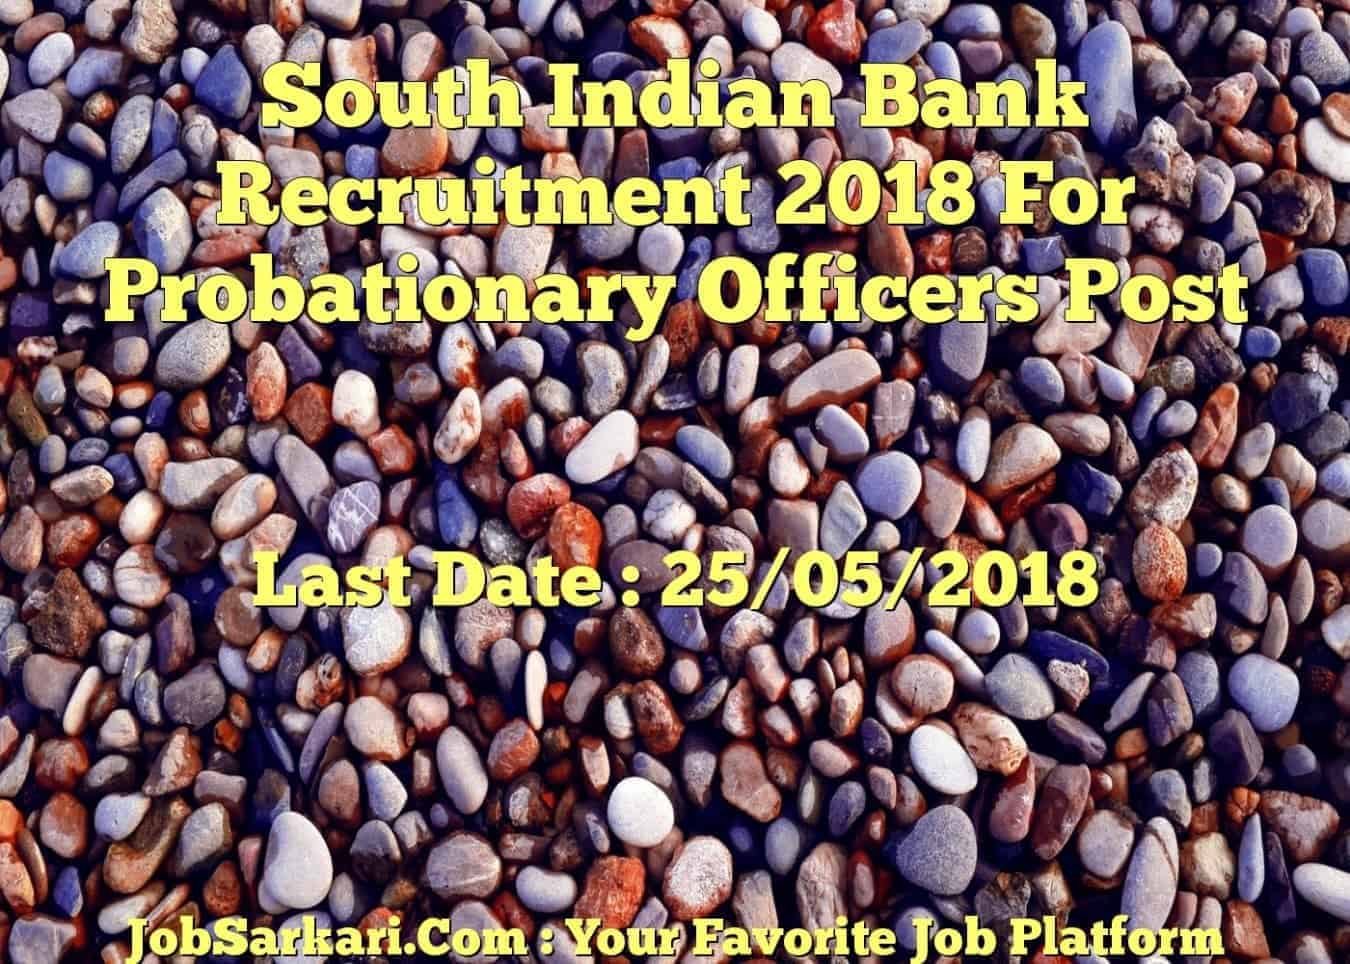 South Indian Bank Recruitment 2018 For Probationary Officers Post